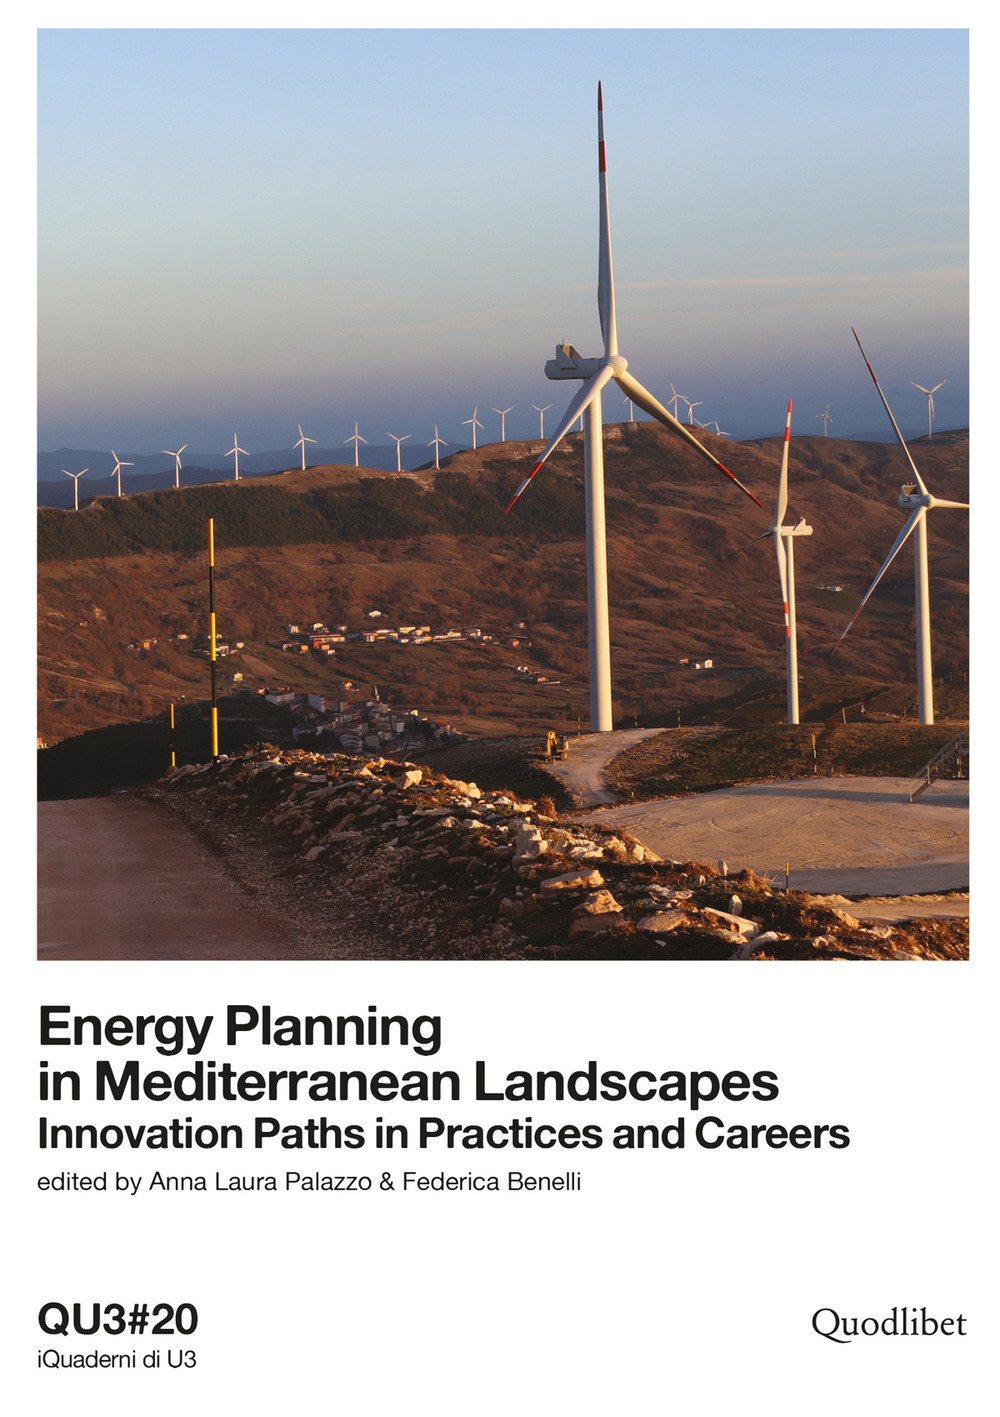 ENERGY PLANNING IN MEDITERRANEAN LANDSCAPES. INNOVATION PATHS IN PRACTICES AND CAREERS - 9788822905413